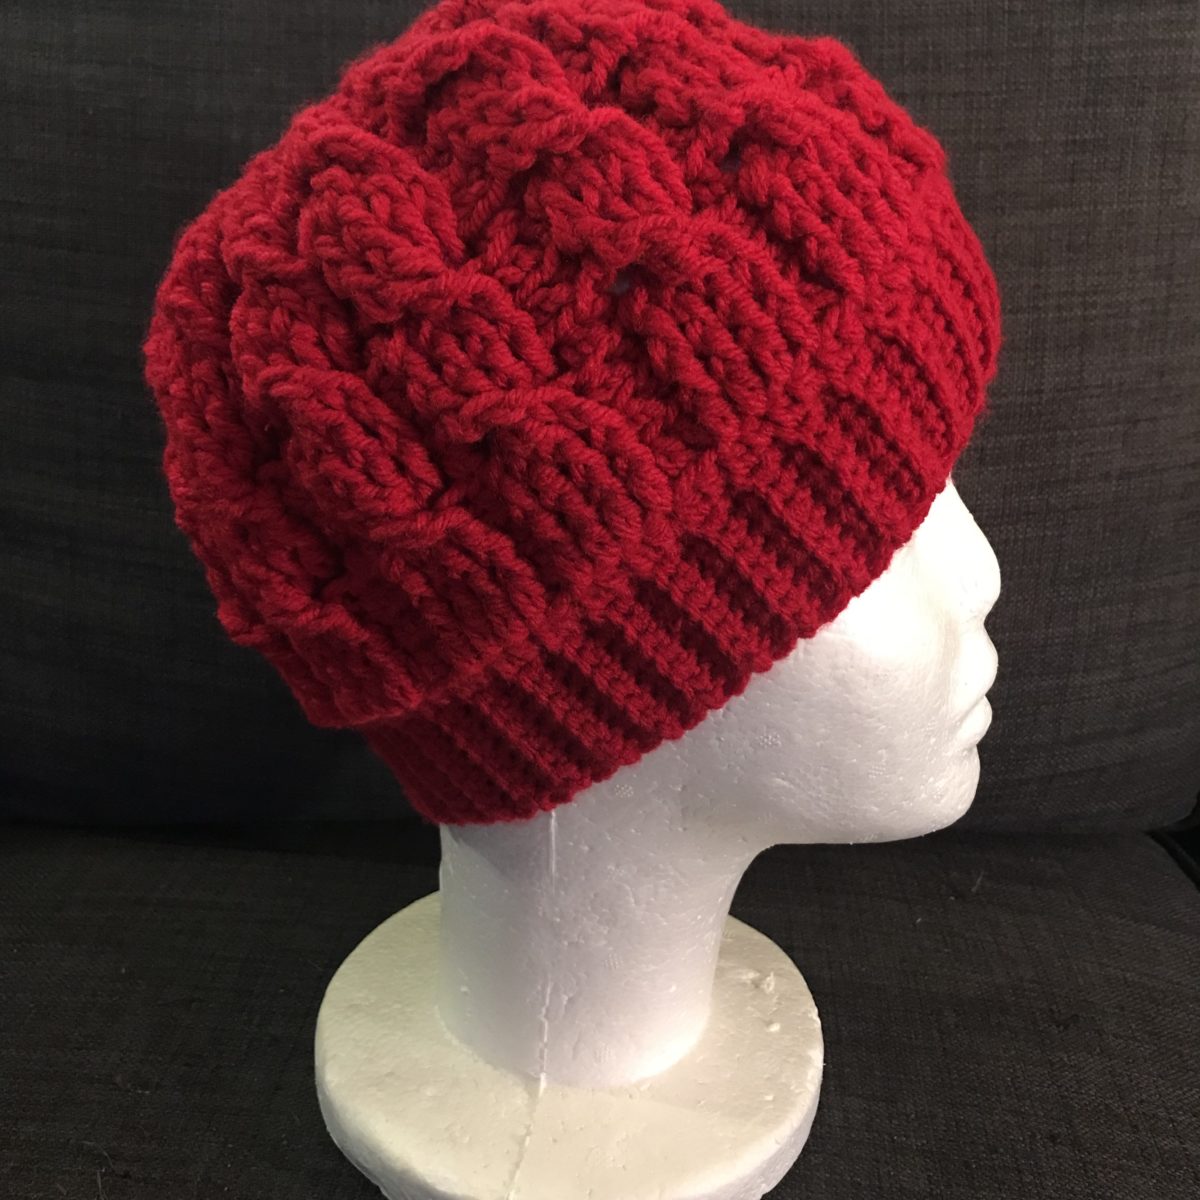 How To Crochet Cabled Beanie/Messy Bun Hat Tutorial